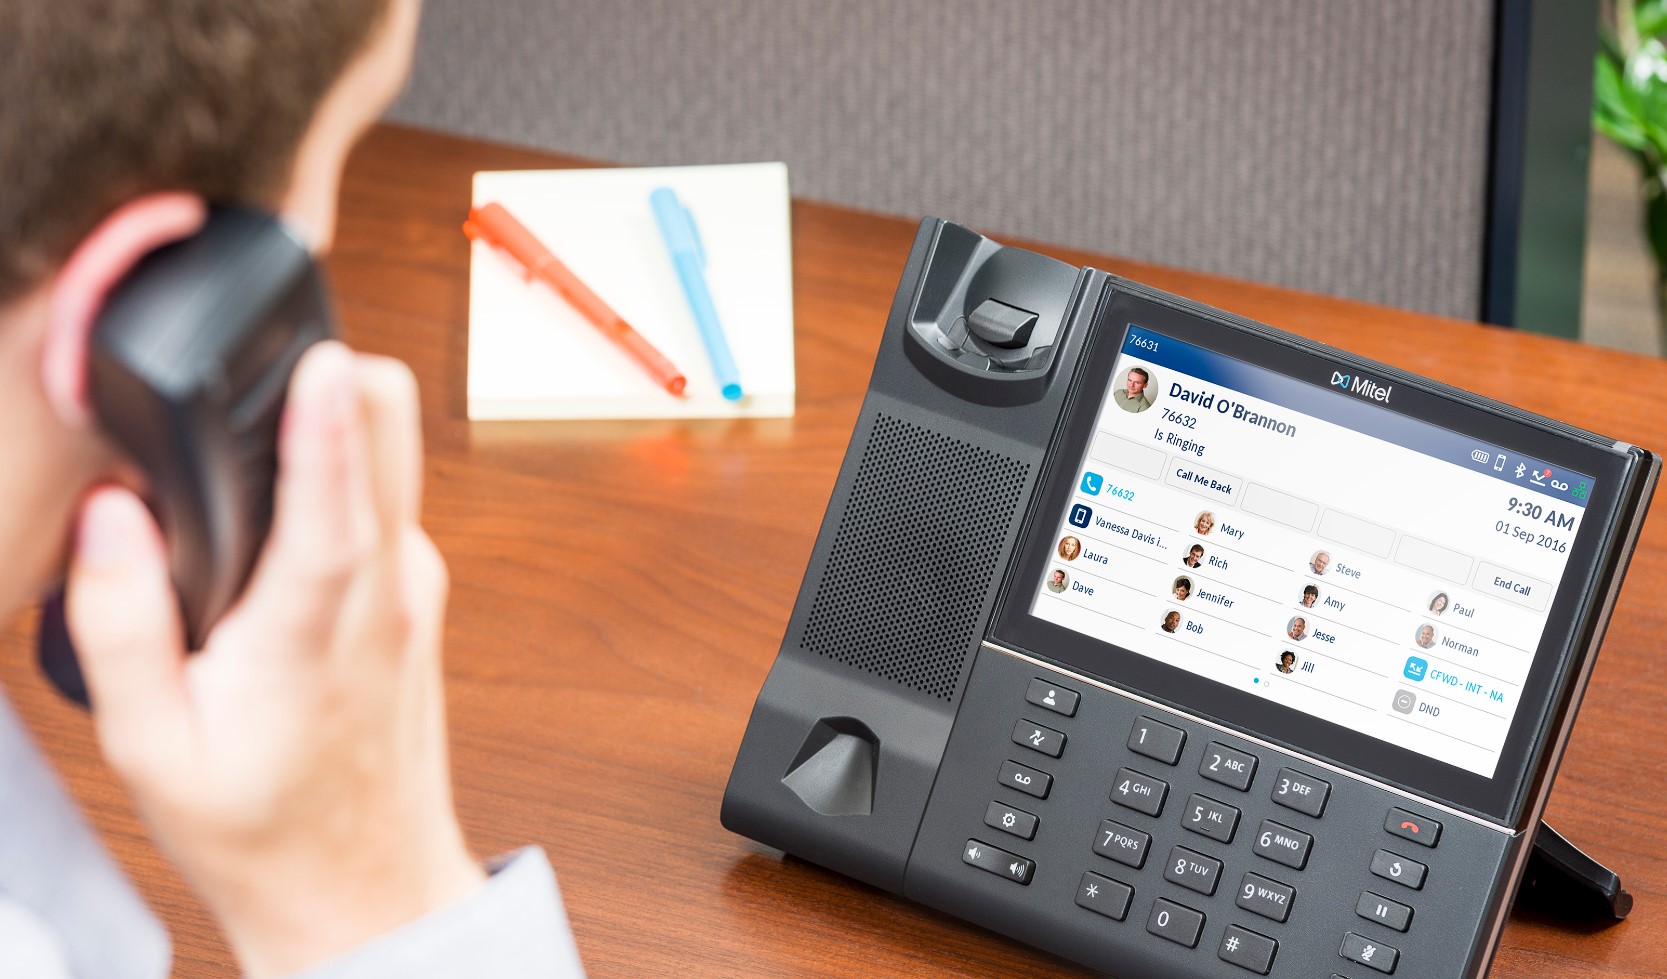 Do Voice Communication Still Matters for Small Businesses?